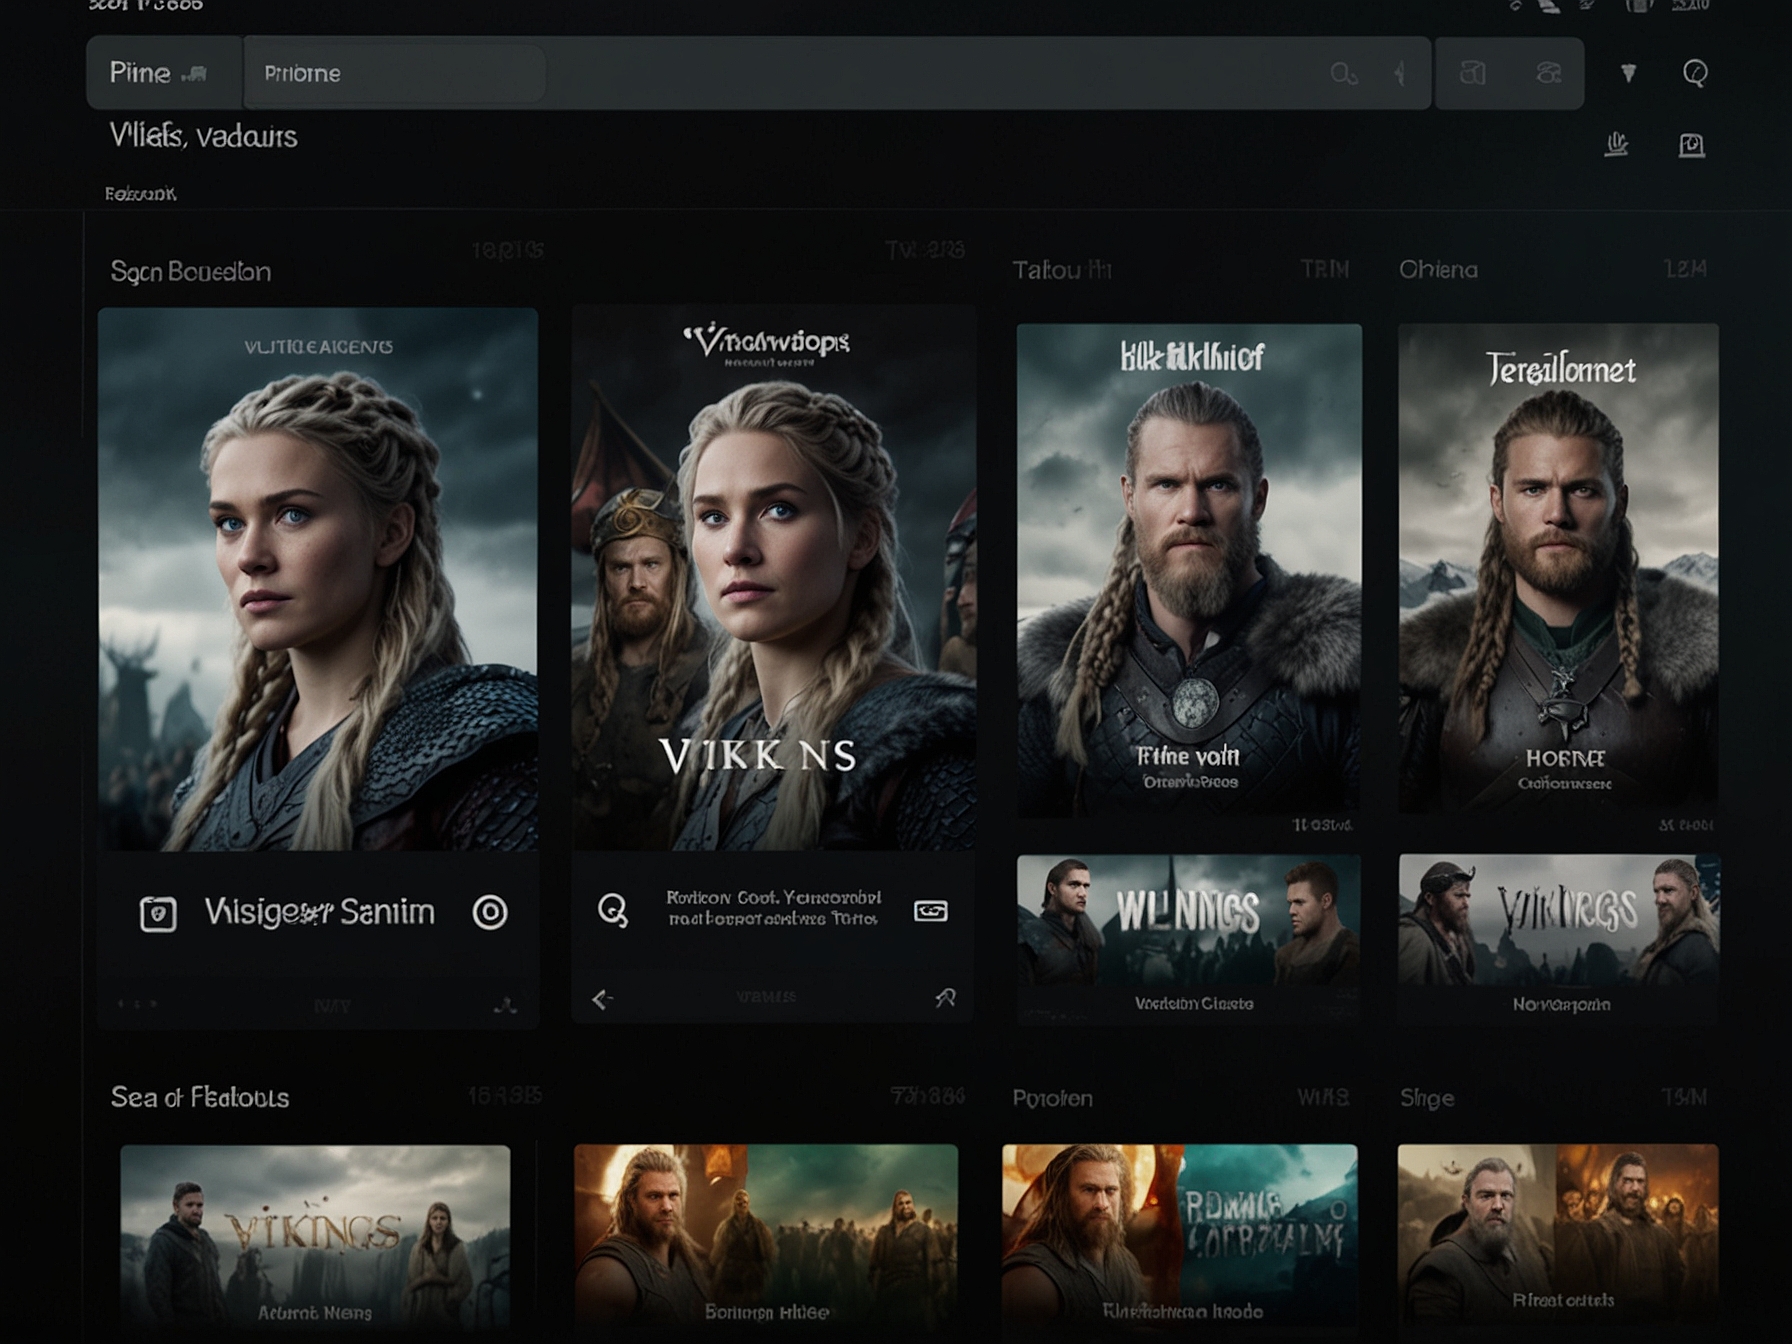 Screenshots of Amazon Prime Video, Hulu, and Paramount+ interfaces showing 'Vikings', highlighting free trial options available for watching the series without cost.